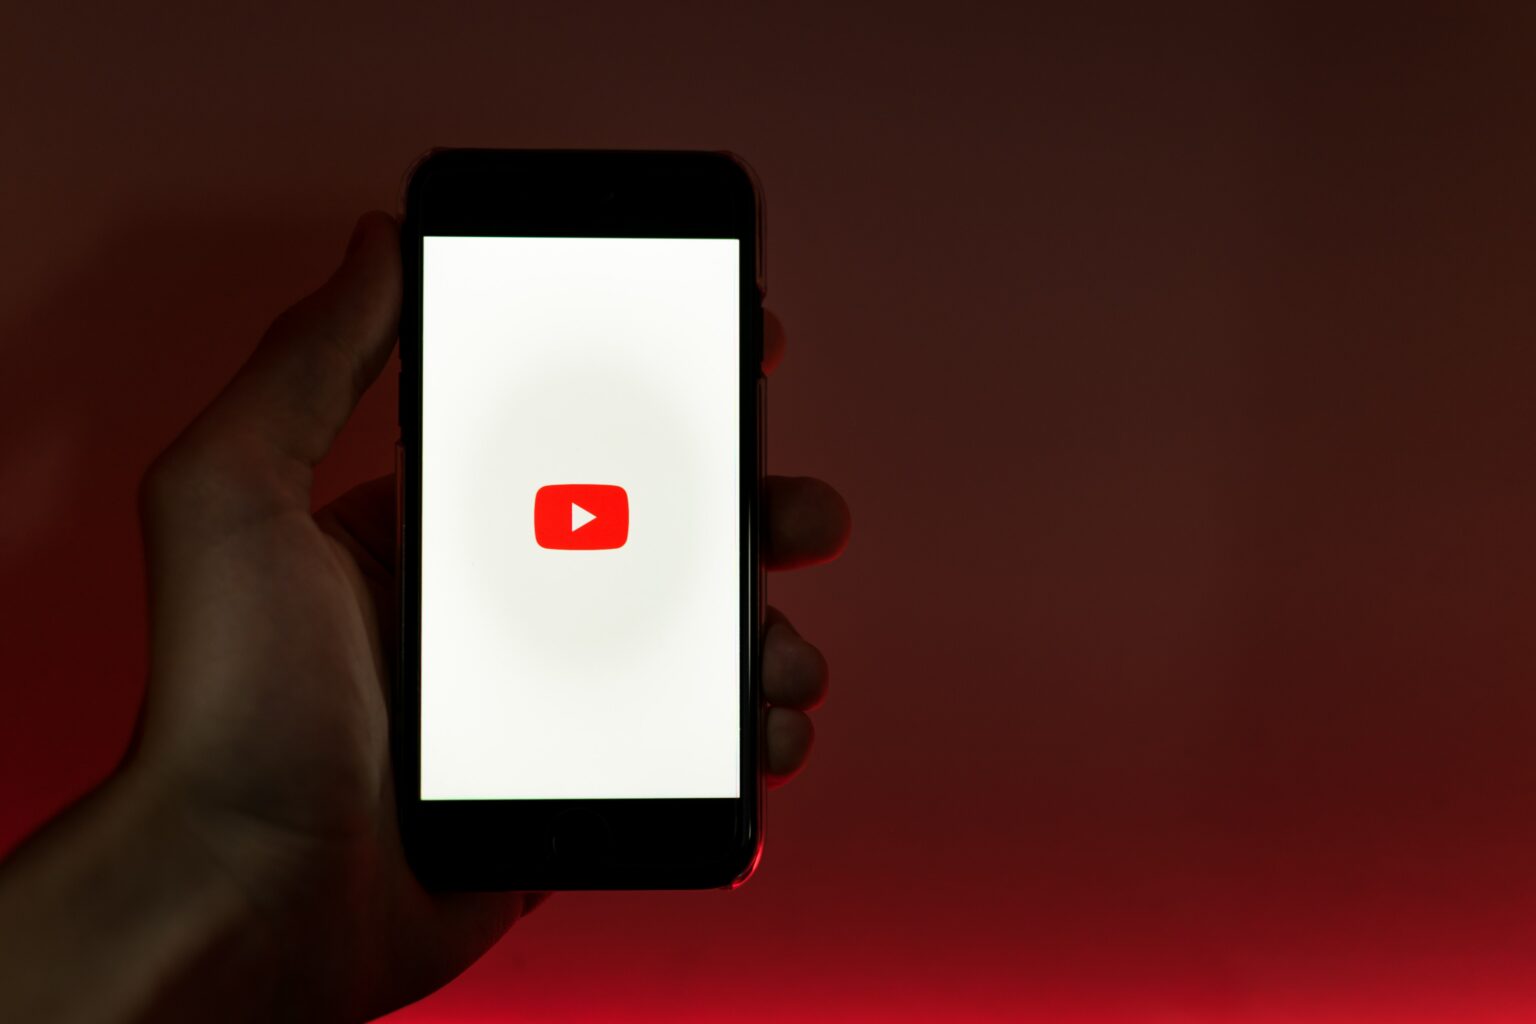 YOUTUBE INFLUENCERS SUCCESSFULLY PROMOTING BRANDS, STUDY SAYS